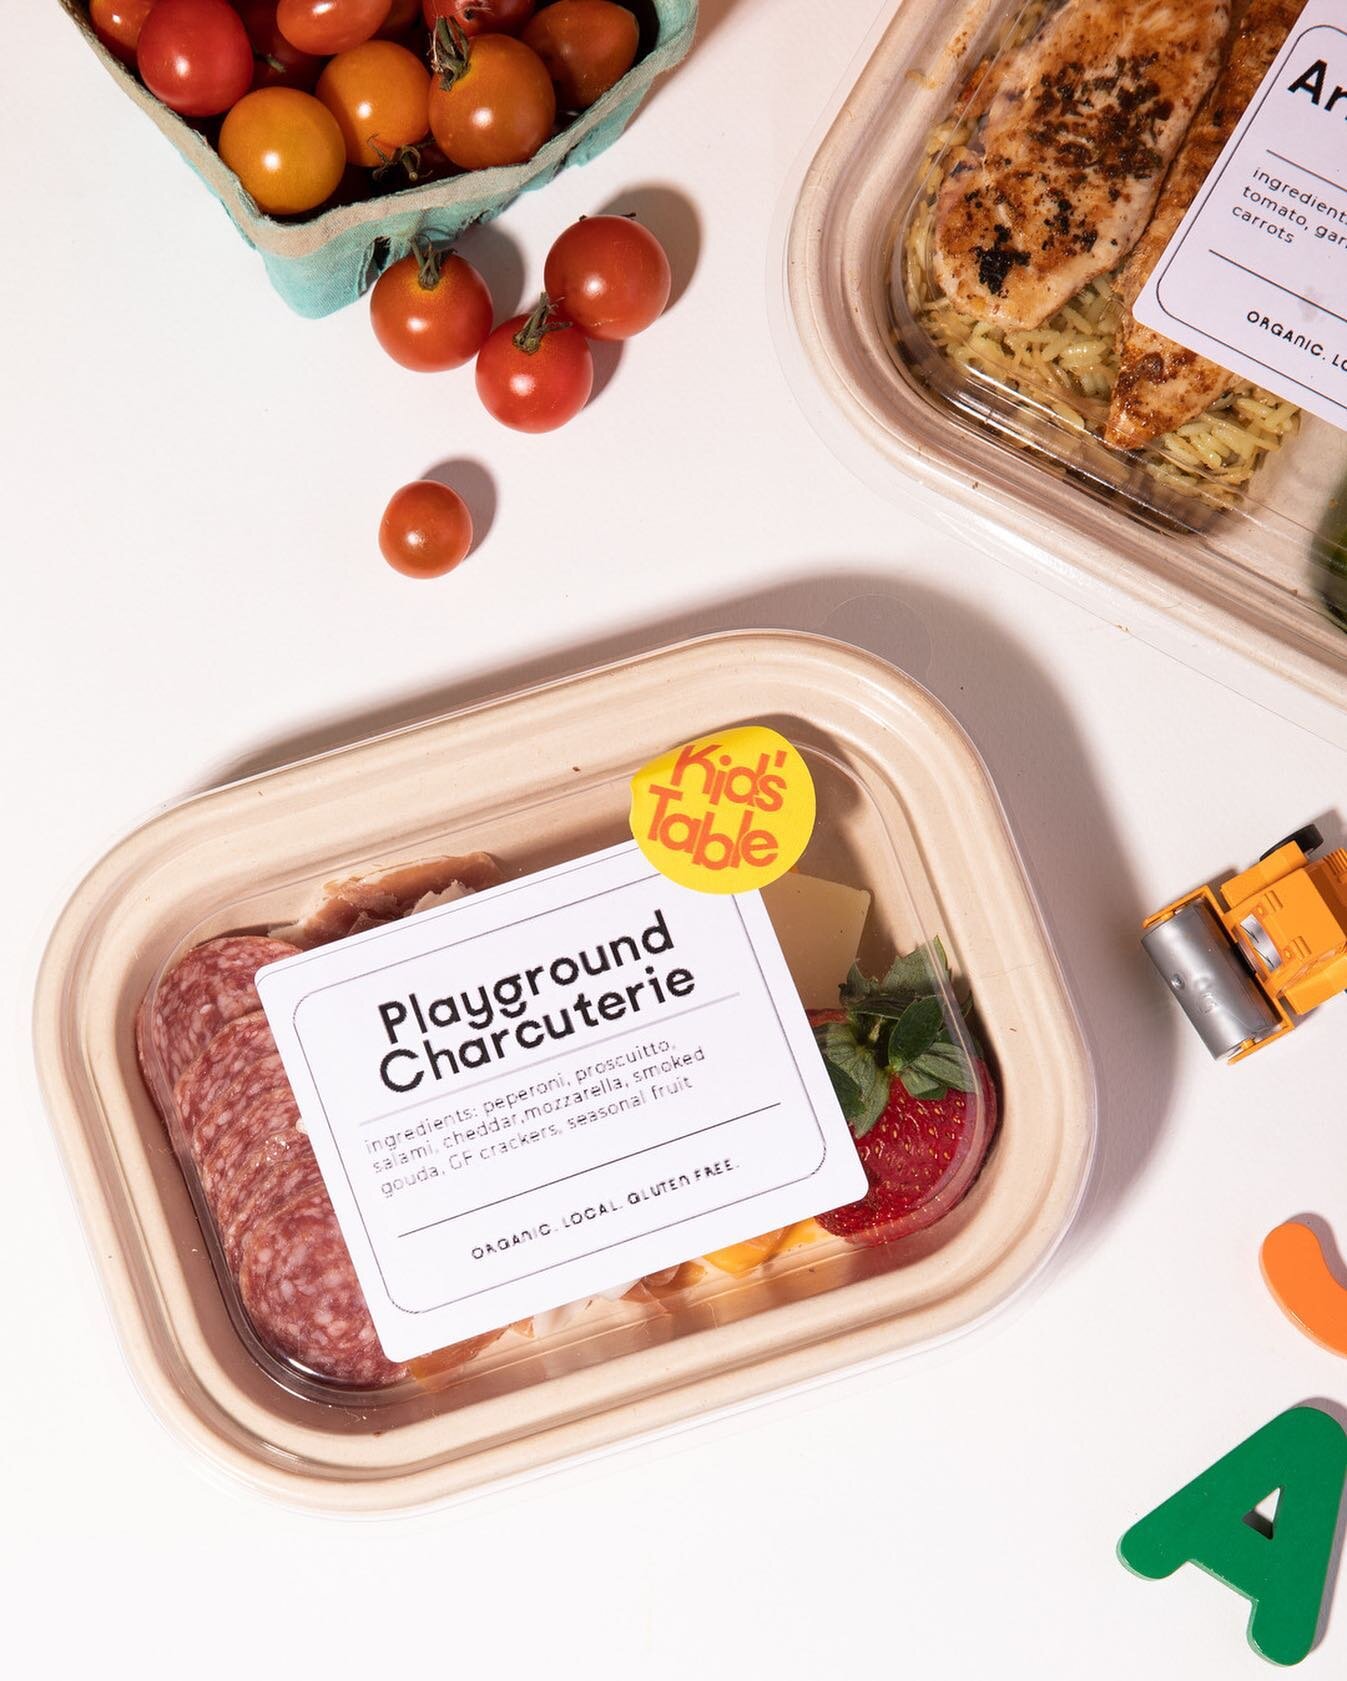 NEW MENU ITEM ALERT 💥 Now introducing our Playground Charcuterie packed with protein, fruits, veggies, fiber and deliciousness. This one is perfect for the picky eaters! Order today for next weeks delivery!